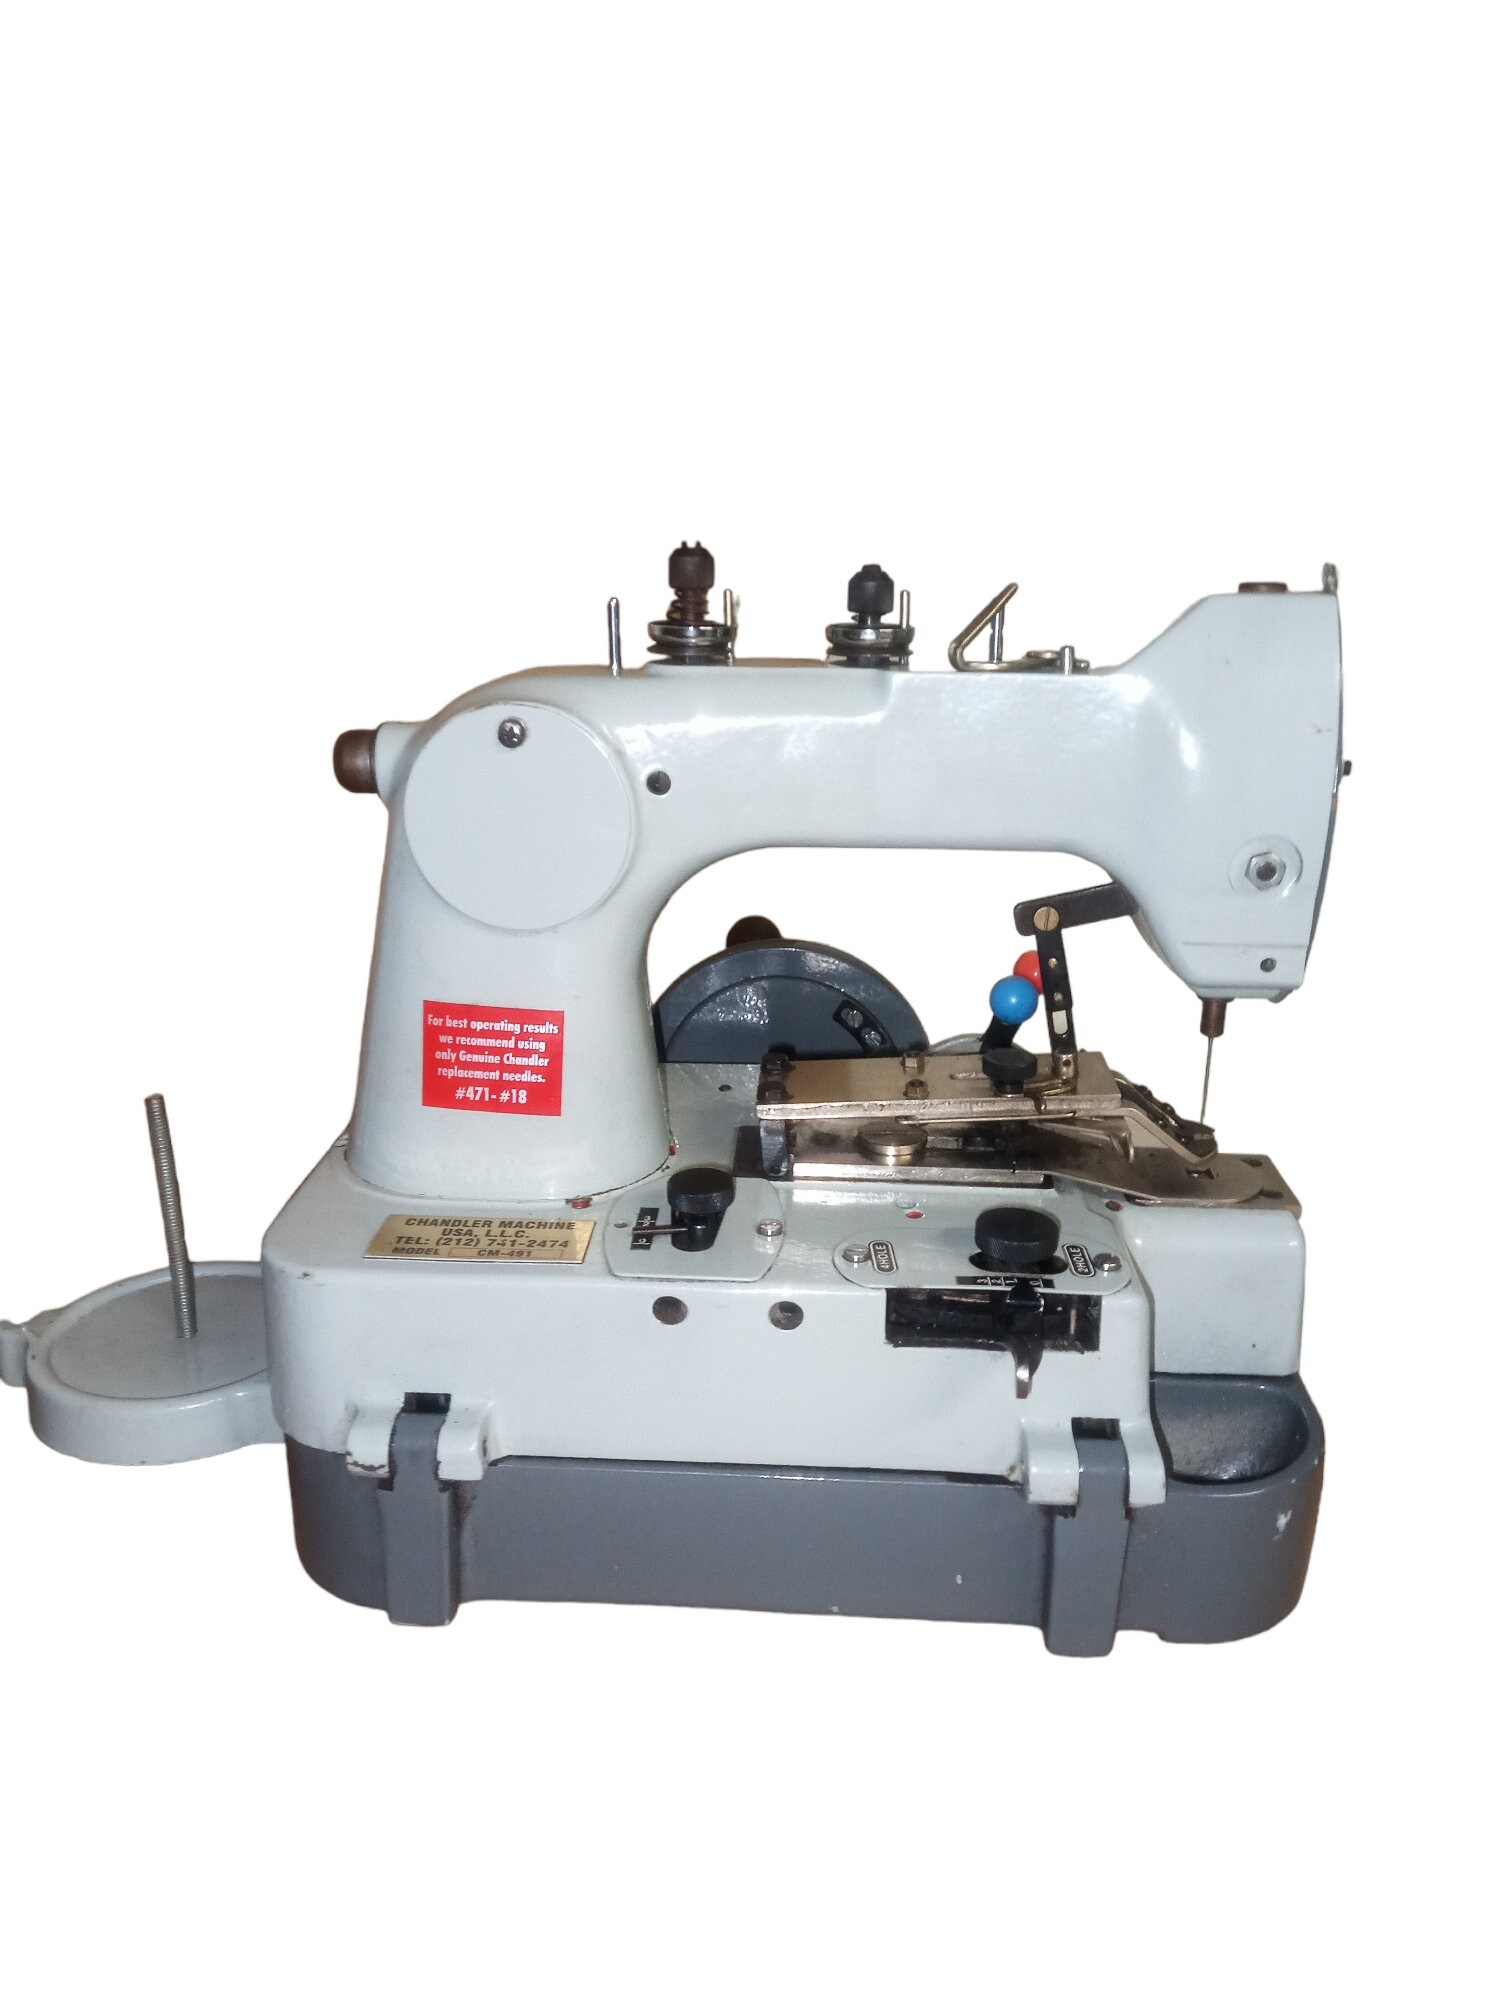 Brother Sewing Machine Model LX3817 machine Only 